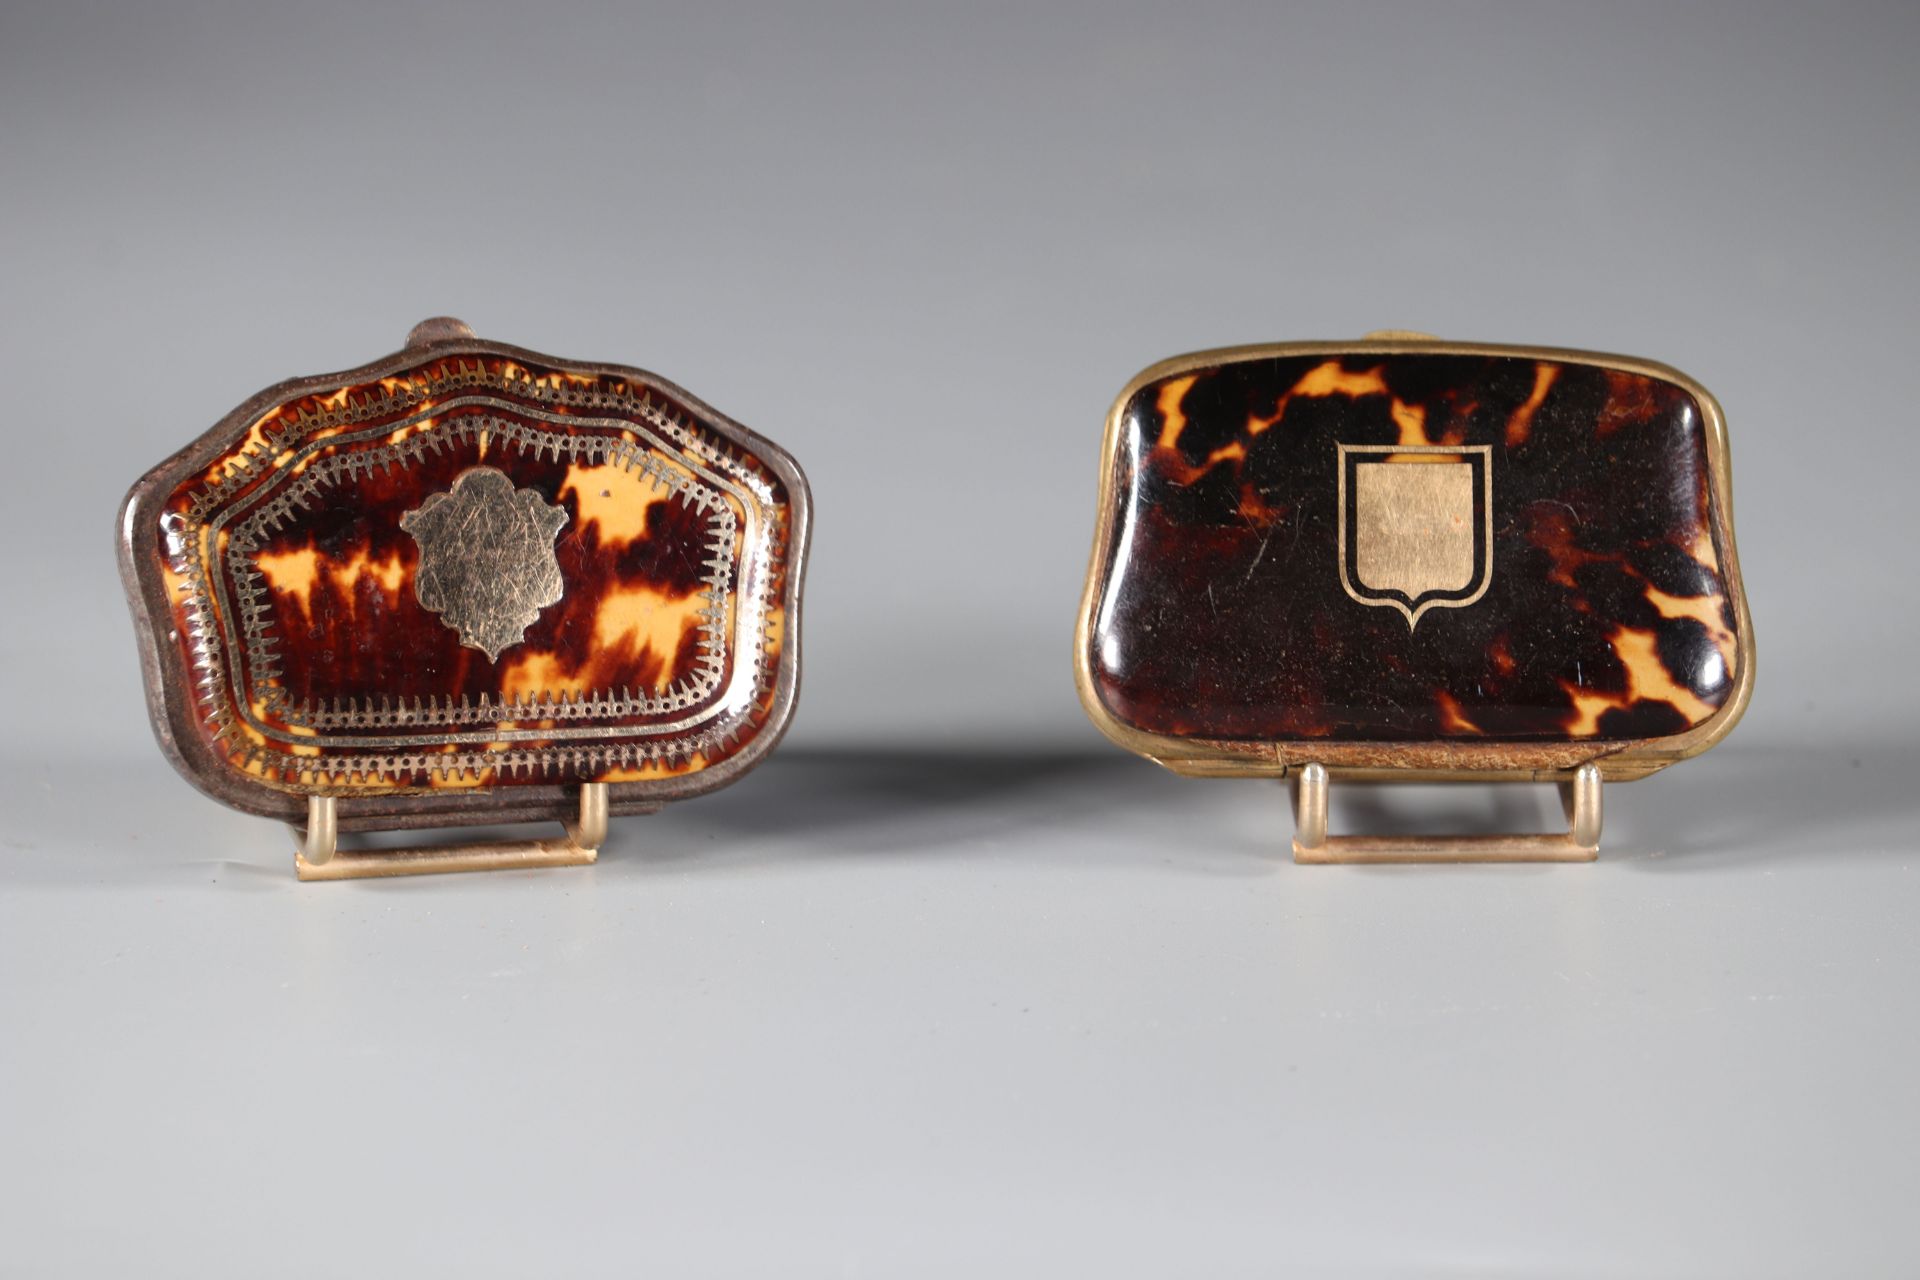 Lot of two tortoiseshell coin purses and gold inlays. France at the end of the 19th century.